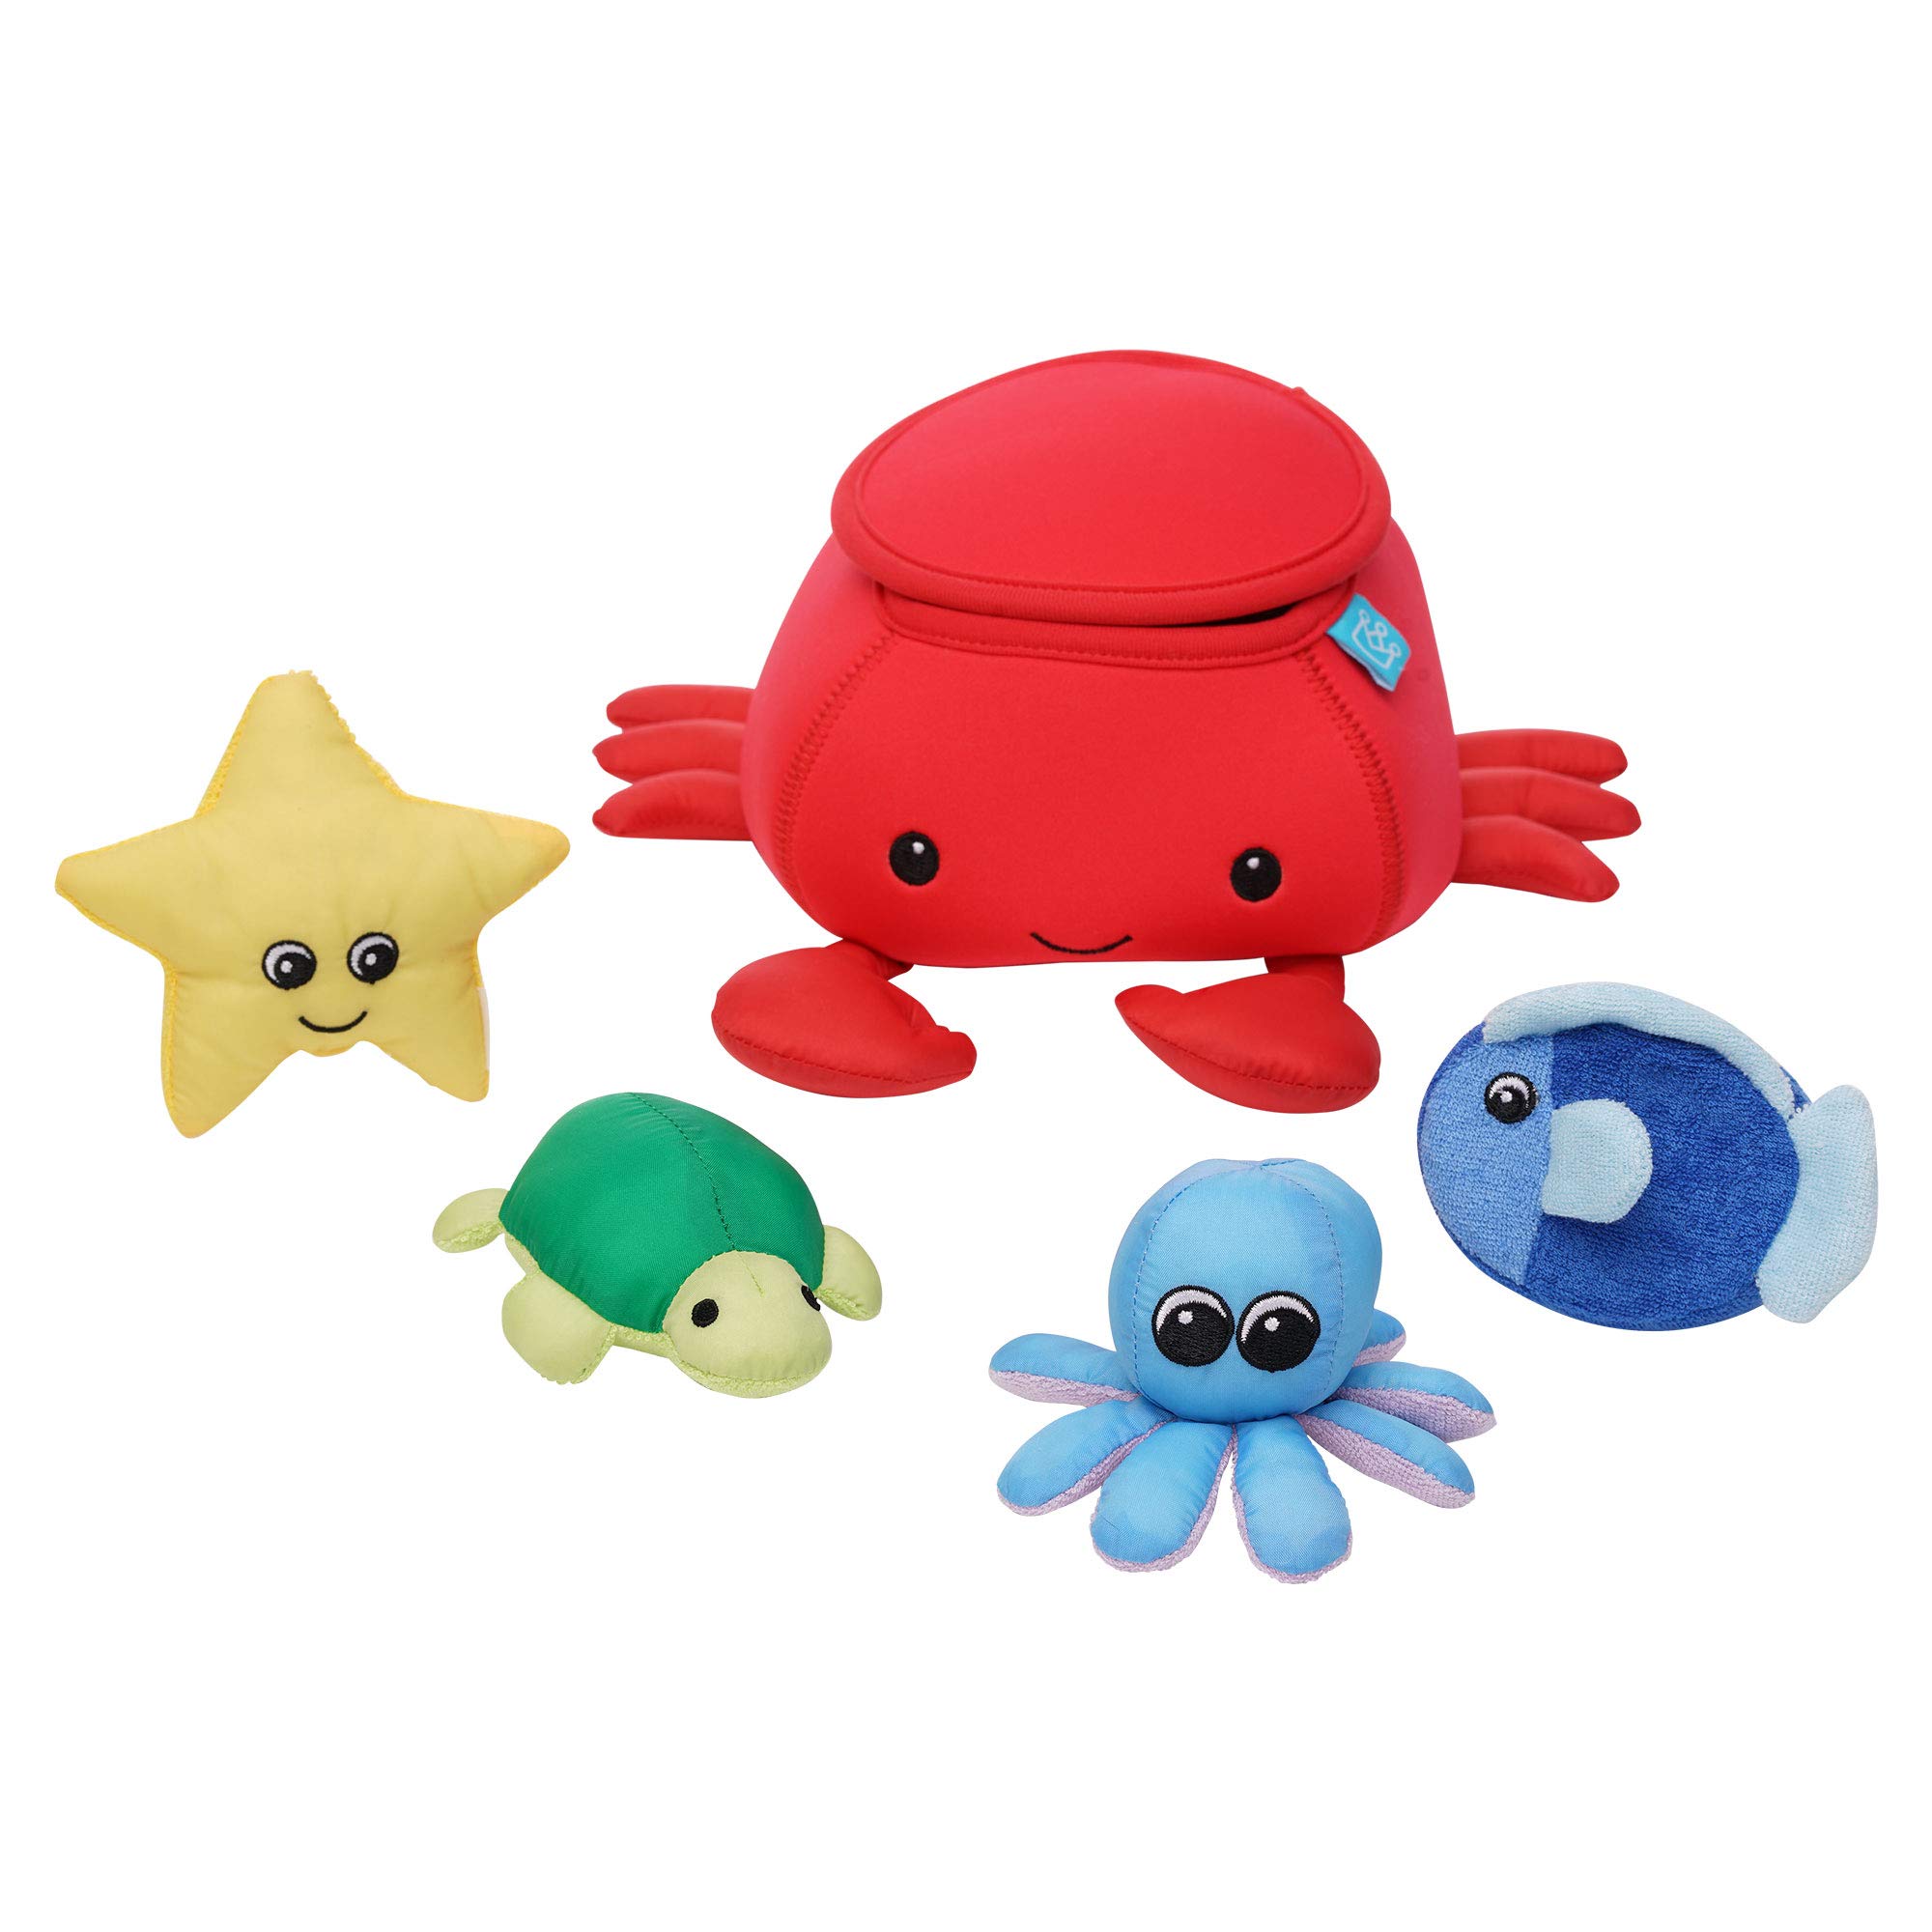 Manhattan Toy Neoprene Crab 5-Piece Floating Spill n Fill Bath Toy with Quick Dry Sponges and Squirt Toy